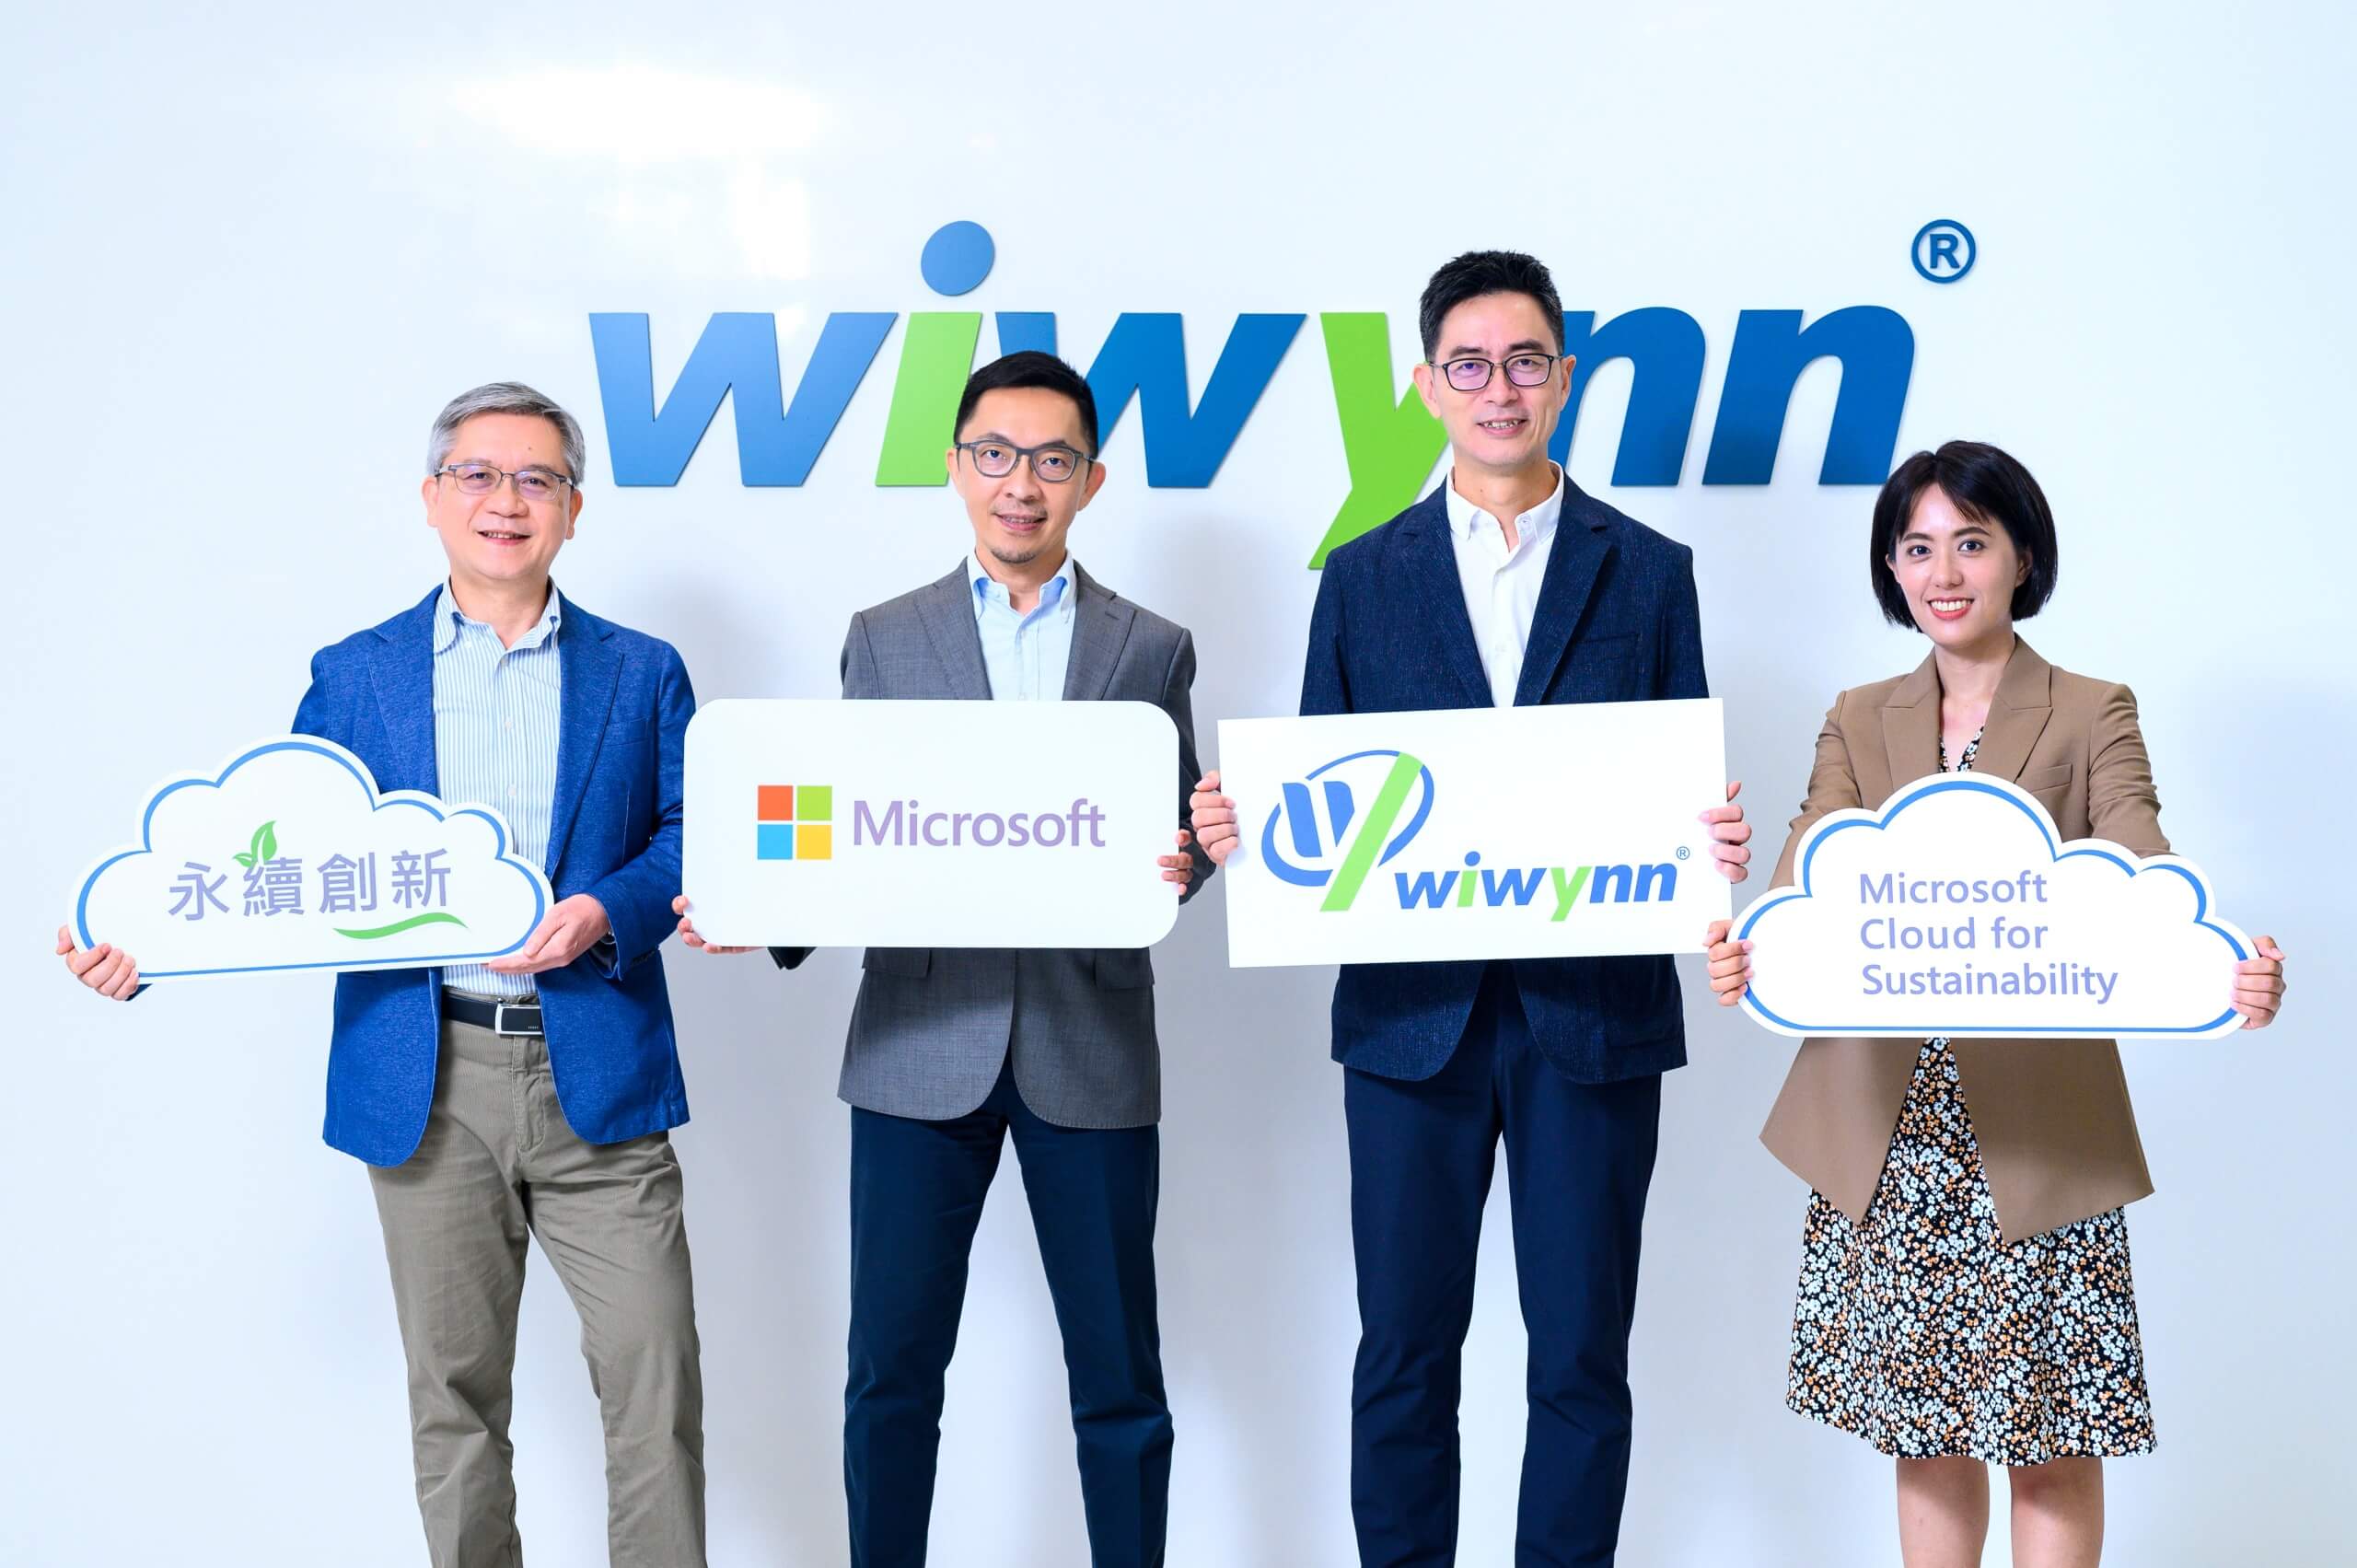 Wiwynn adopts Microsoft Sustainability Cloud to align with the international decarbonization initiatives